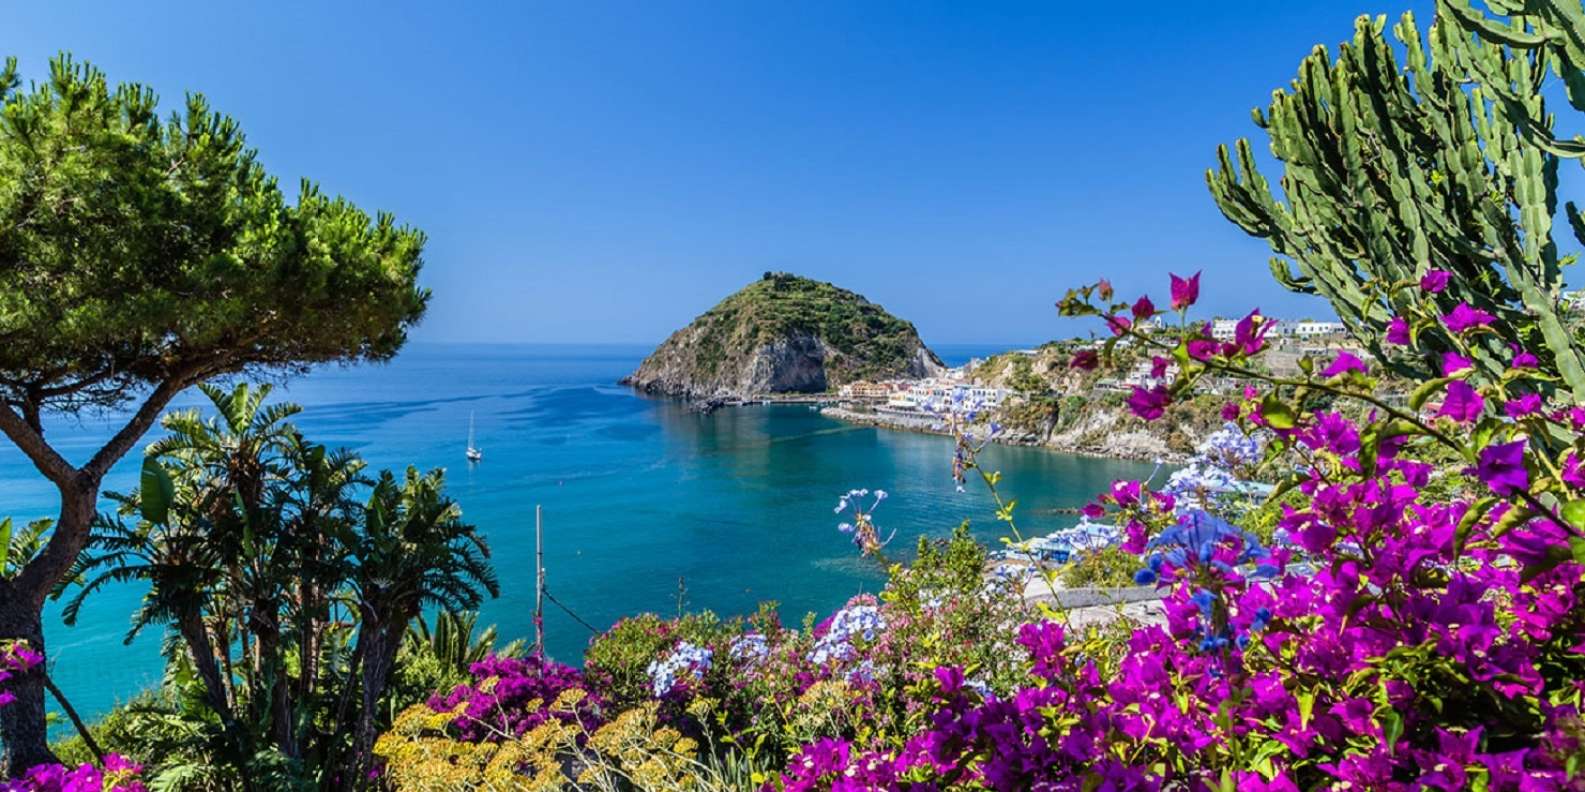 What to do in Ischia